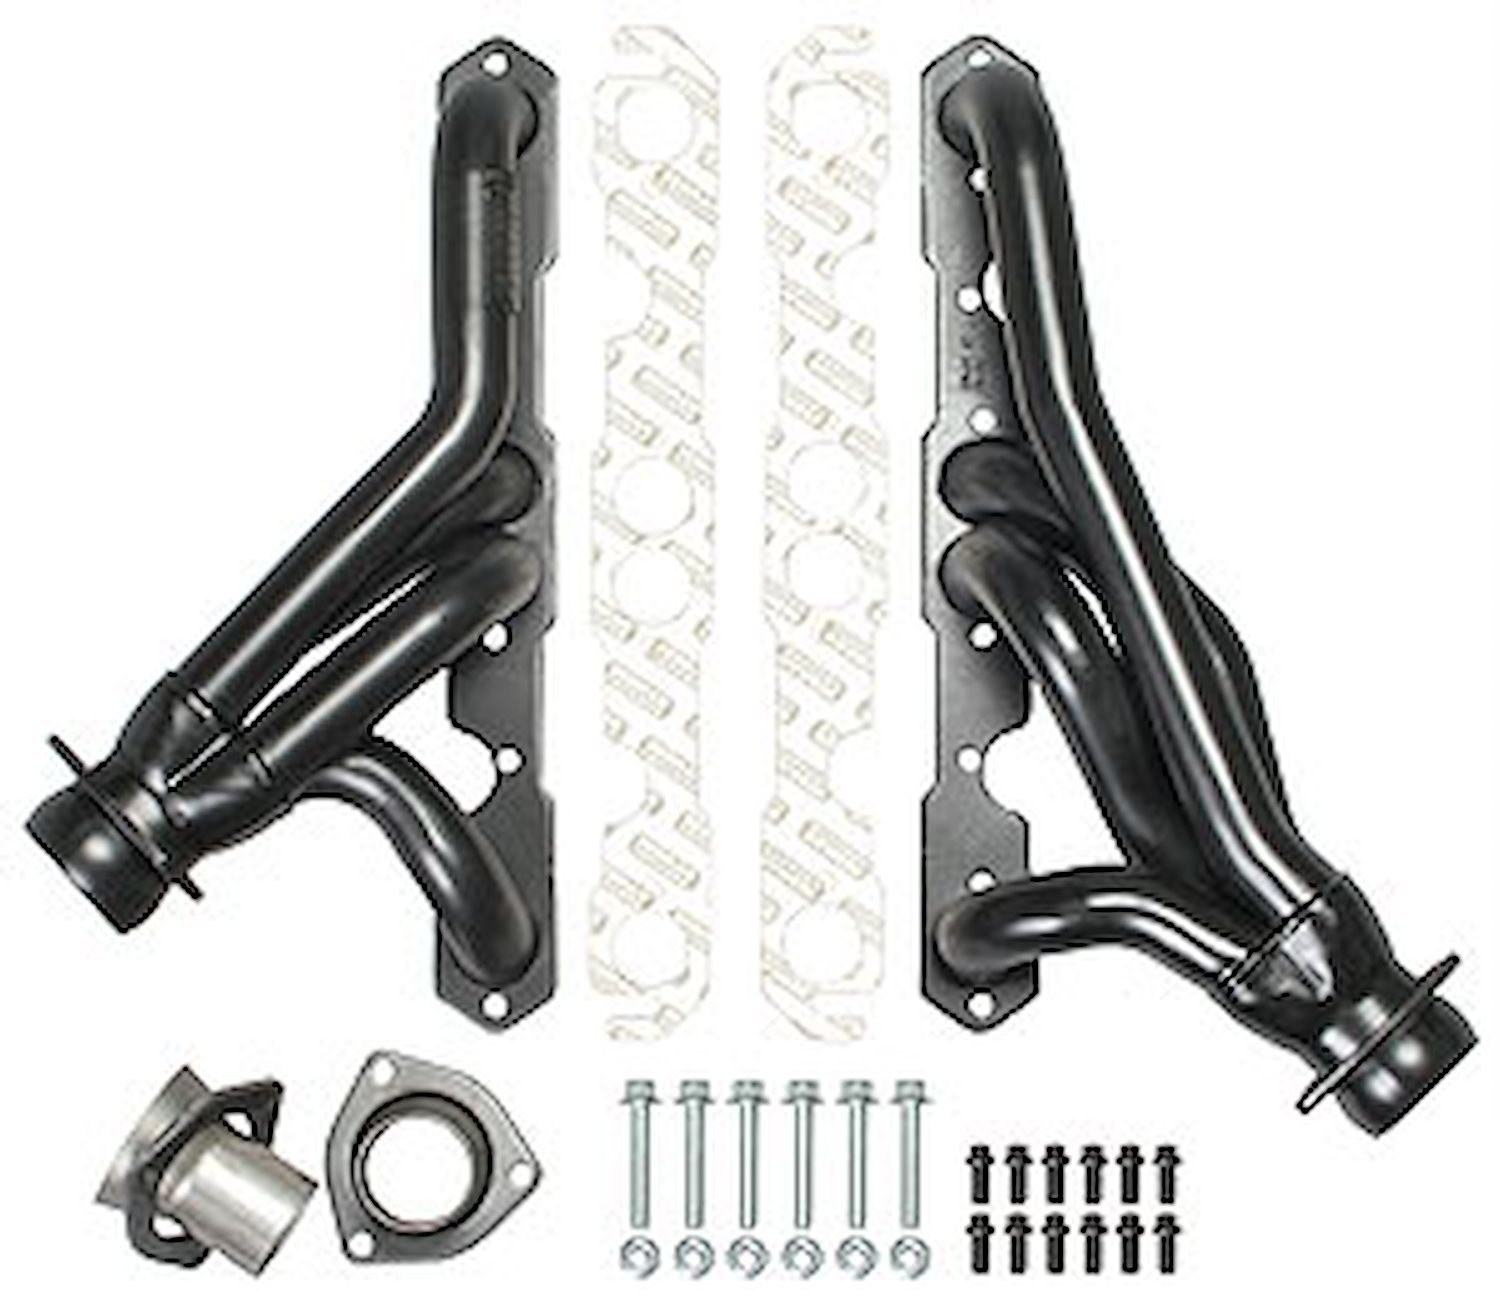 Standard Duty Uncoated Shorty Headers for 1987-95 Jeep Wrangler Engine Swap to SBC 283-400